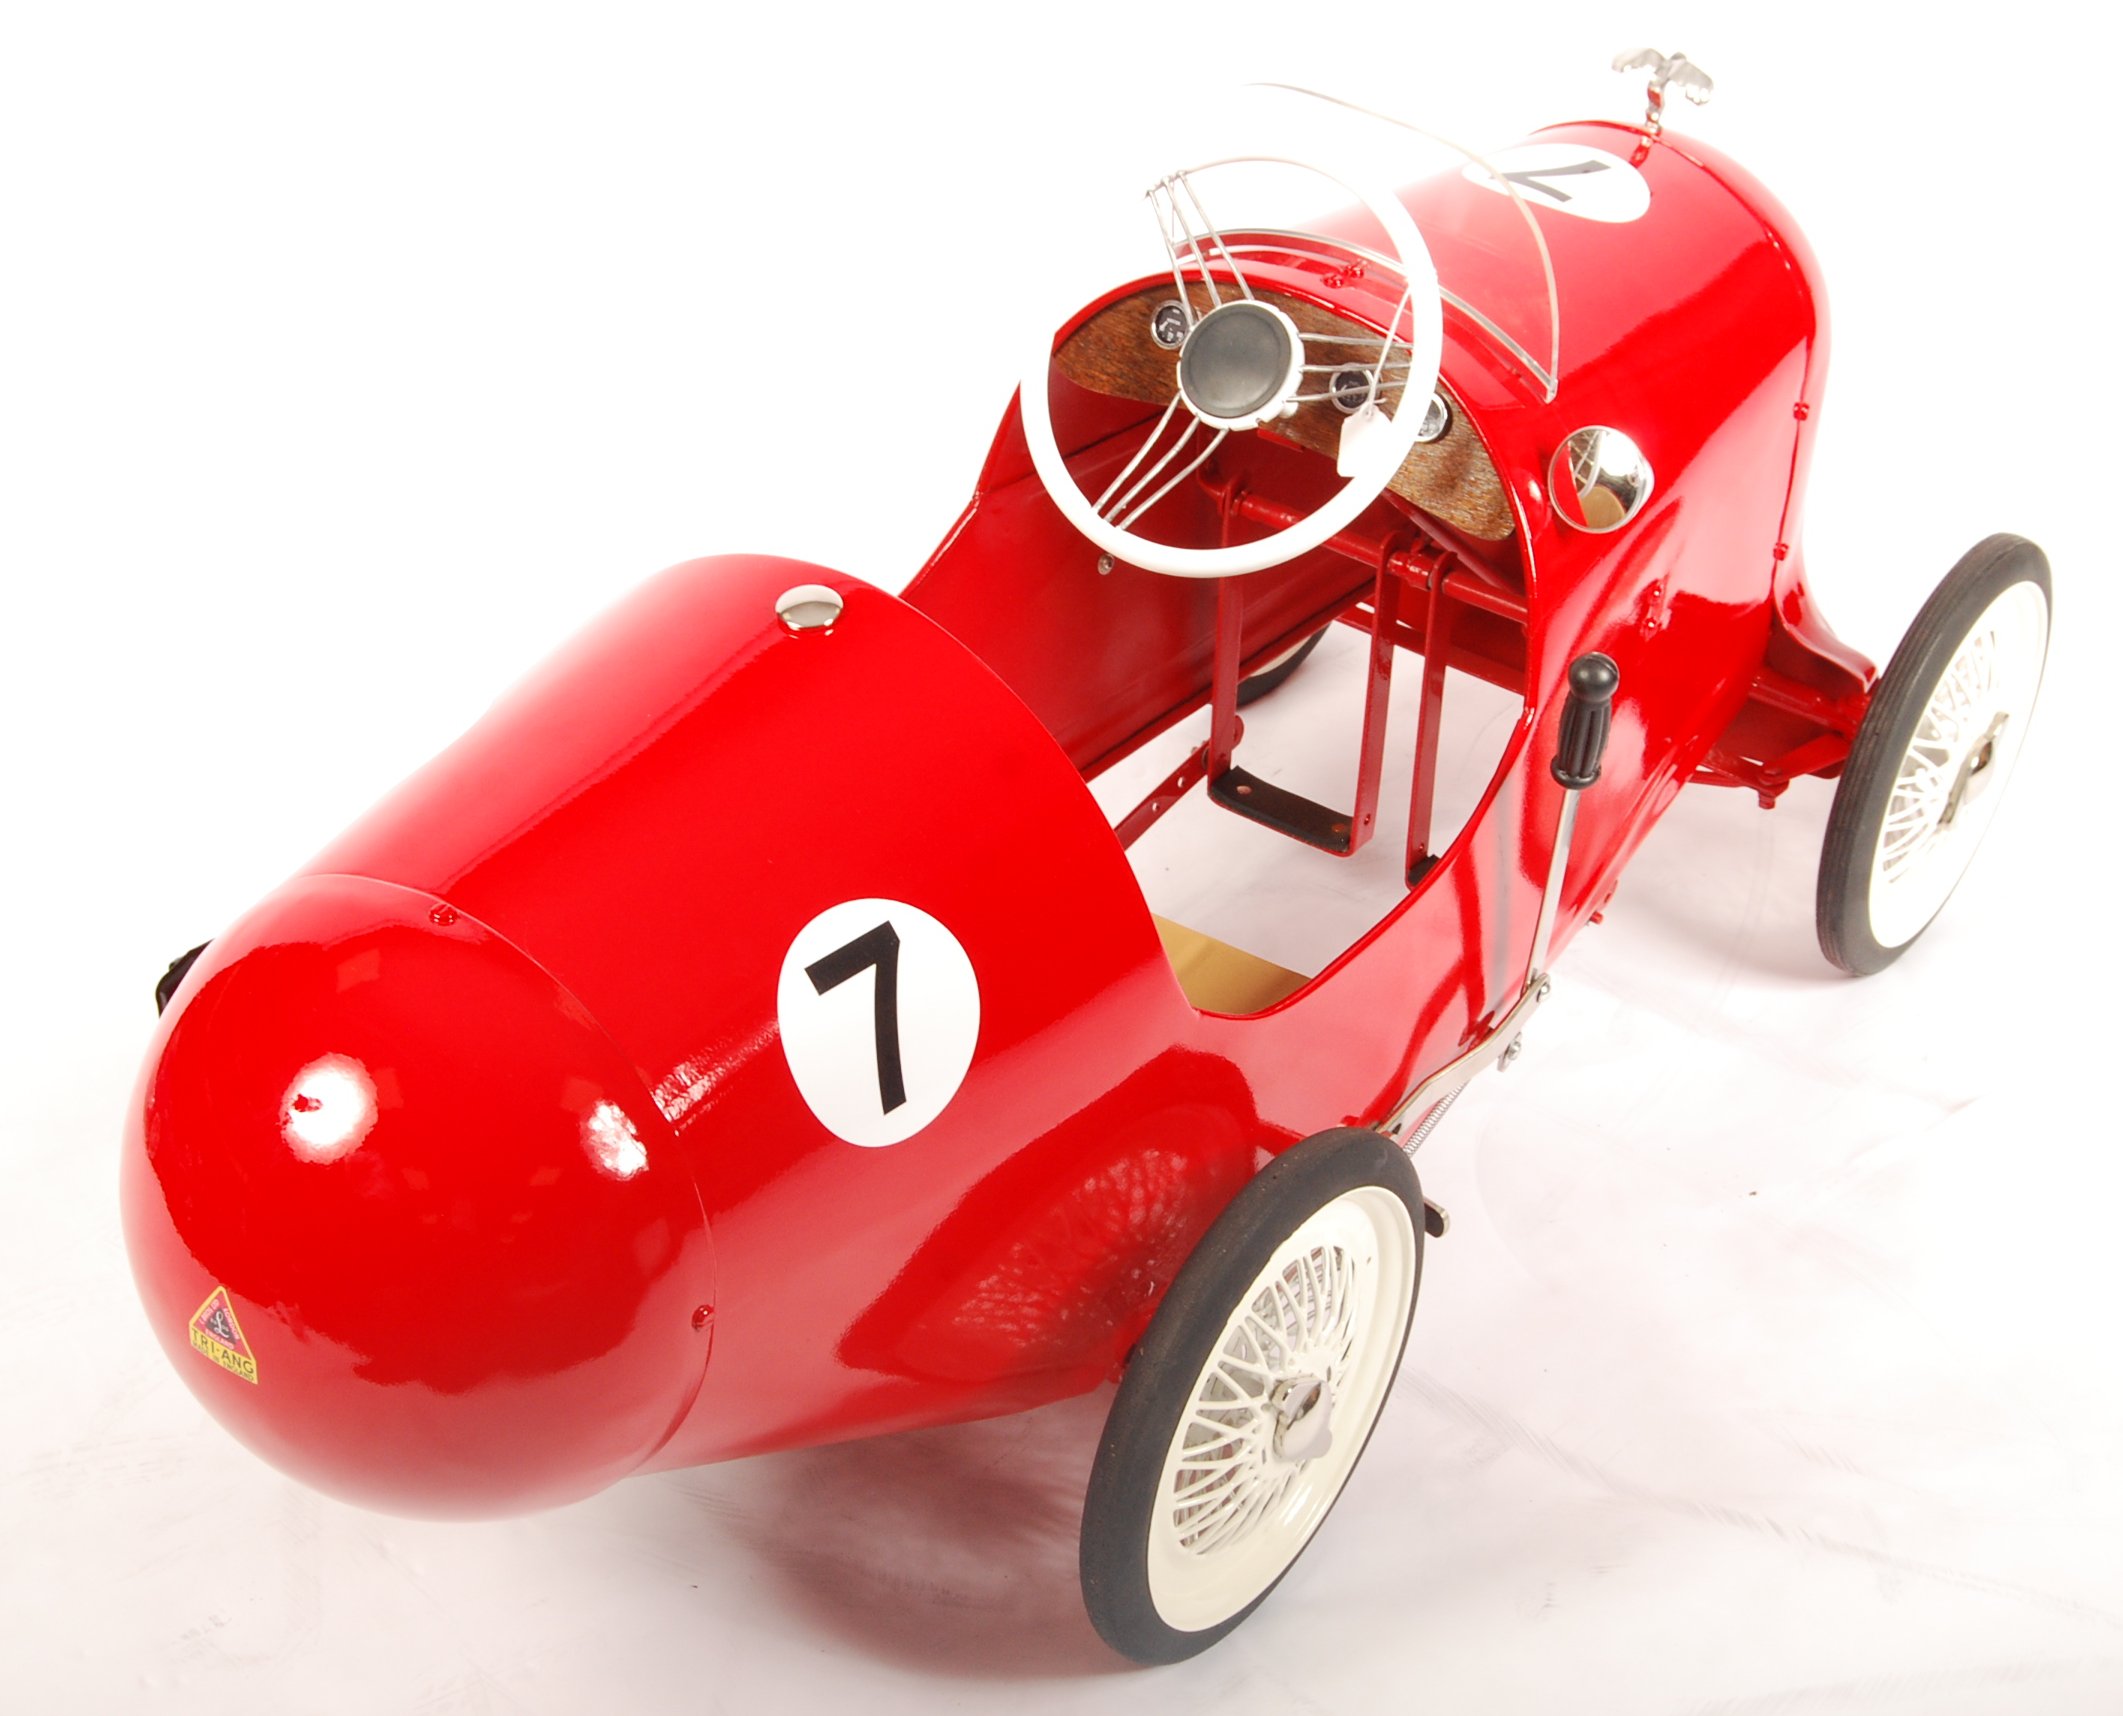 RARE VINTAGE 1960'S TRIANG RACER CHILD'S PEDAL CAR IN RED - Image 7 of 9